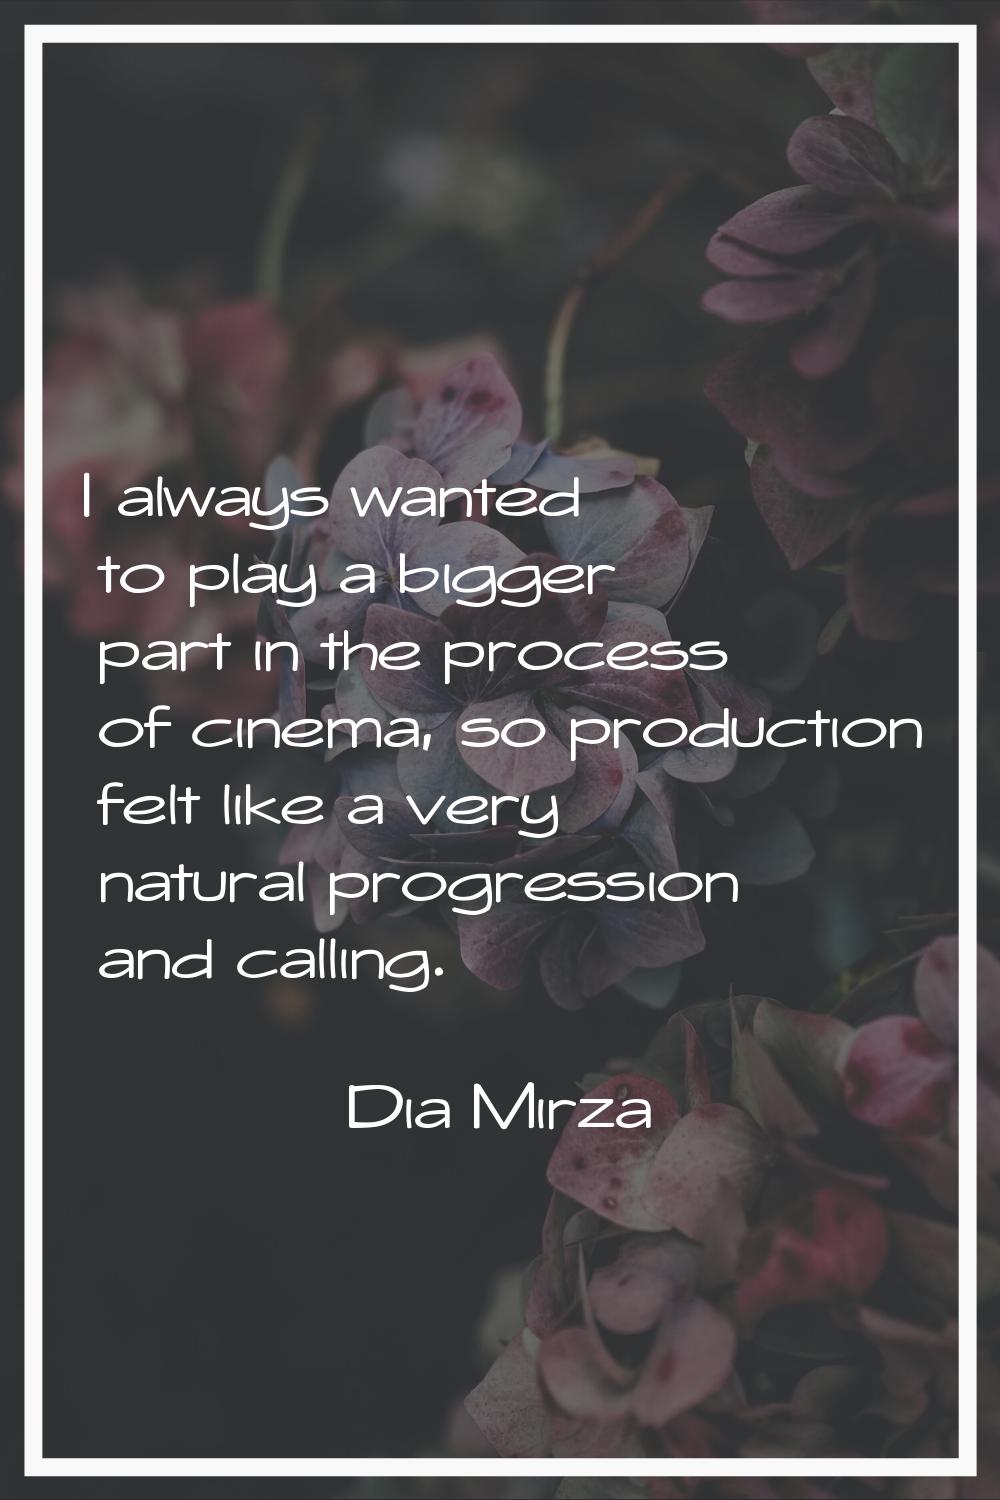 I always wanted to play a bigger part in the process of cinema, so production felt like a very natu